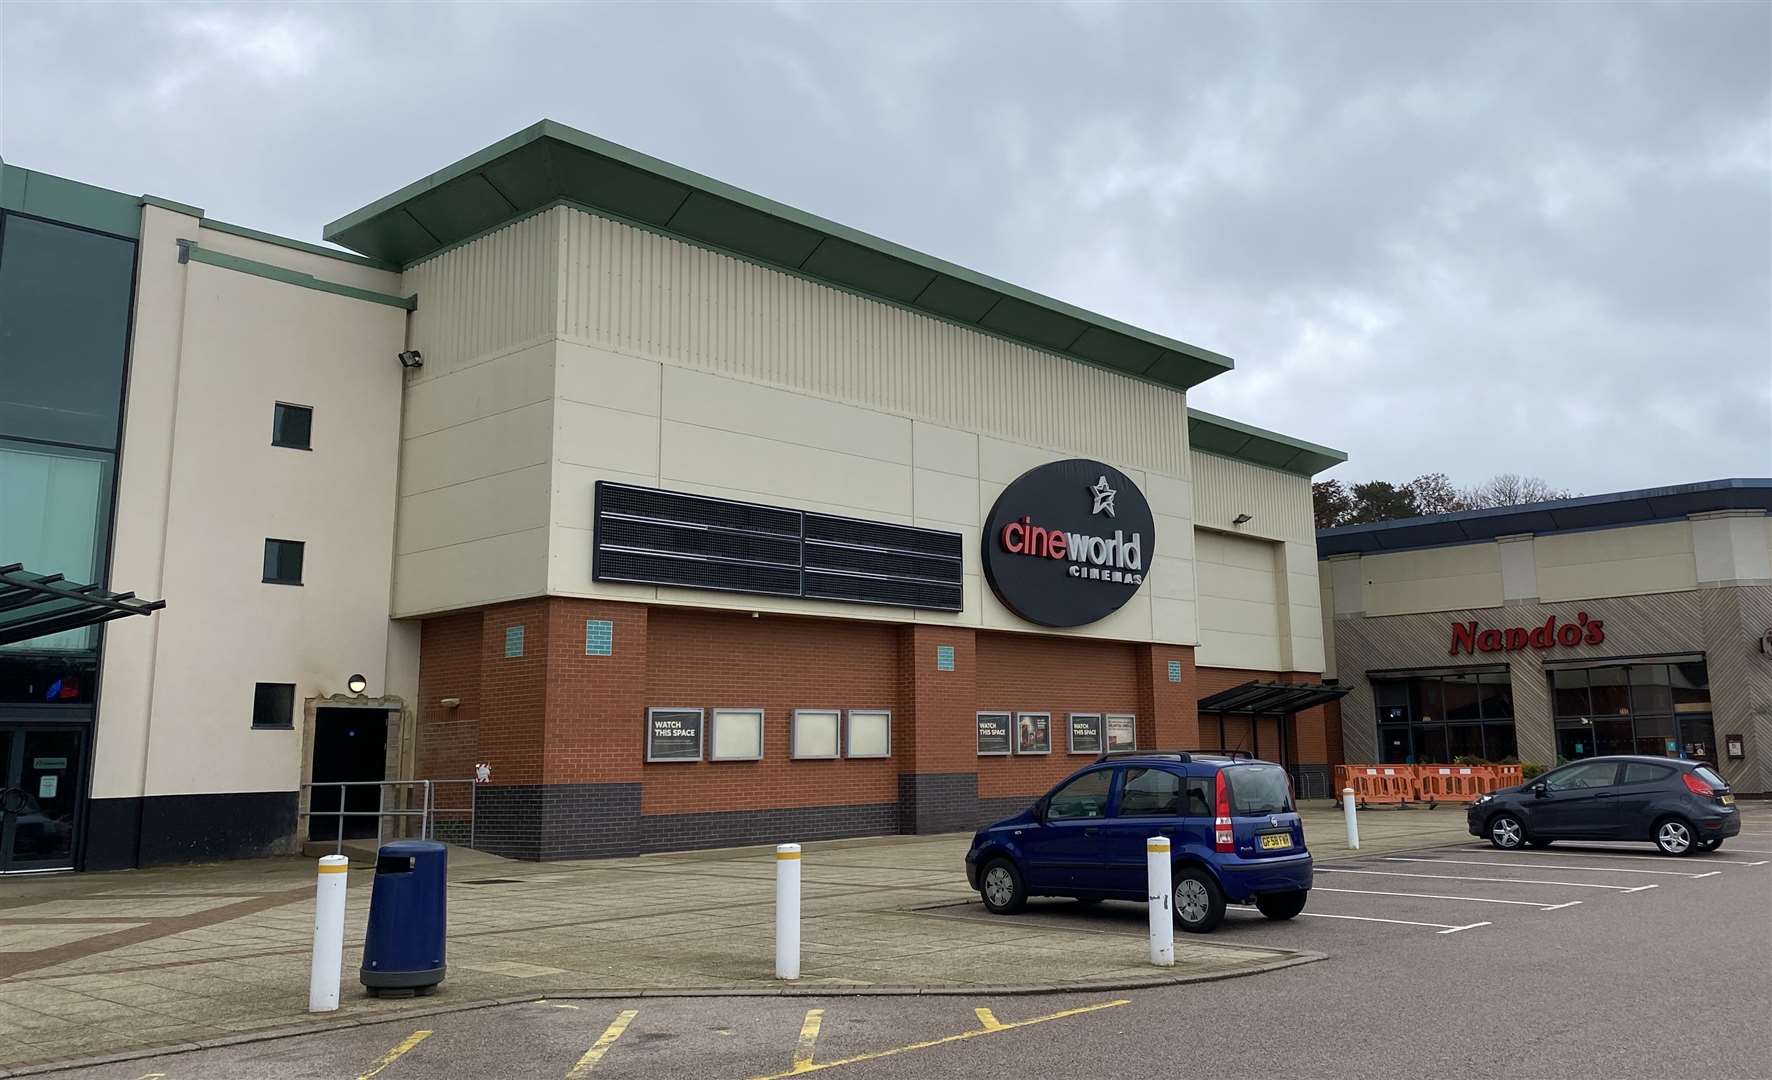 Cineworld venues plan to reopen earlier than expected due to the new Covid-19 vaccines in a win for movie goers